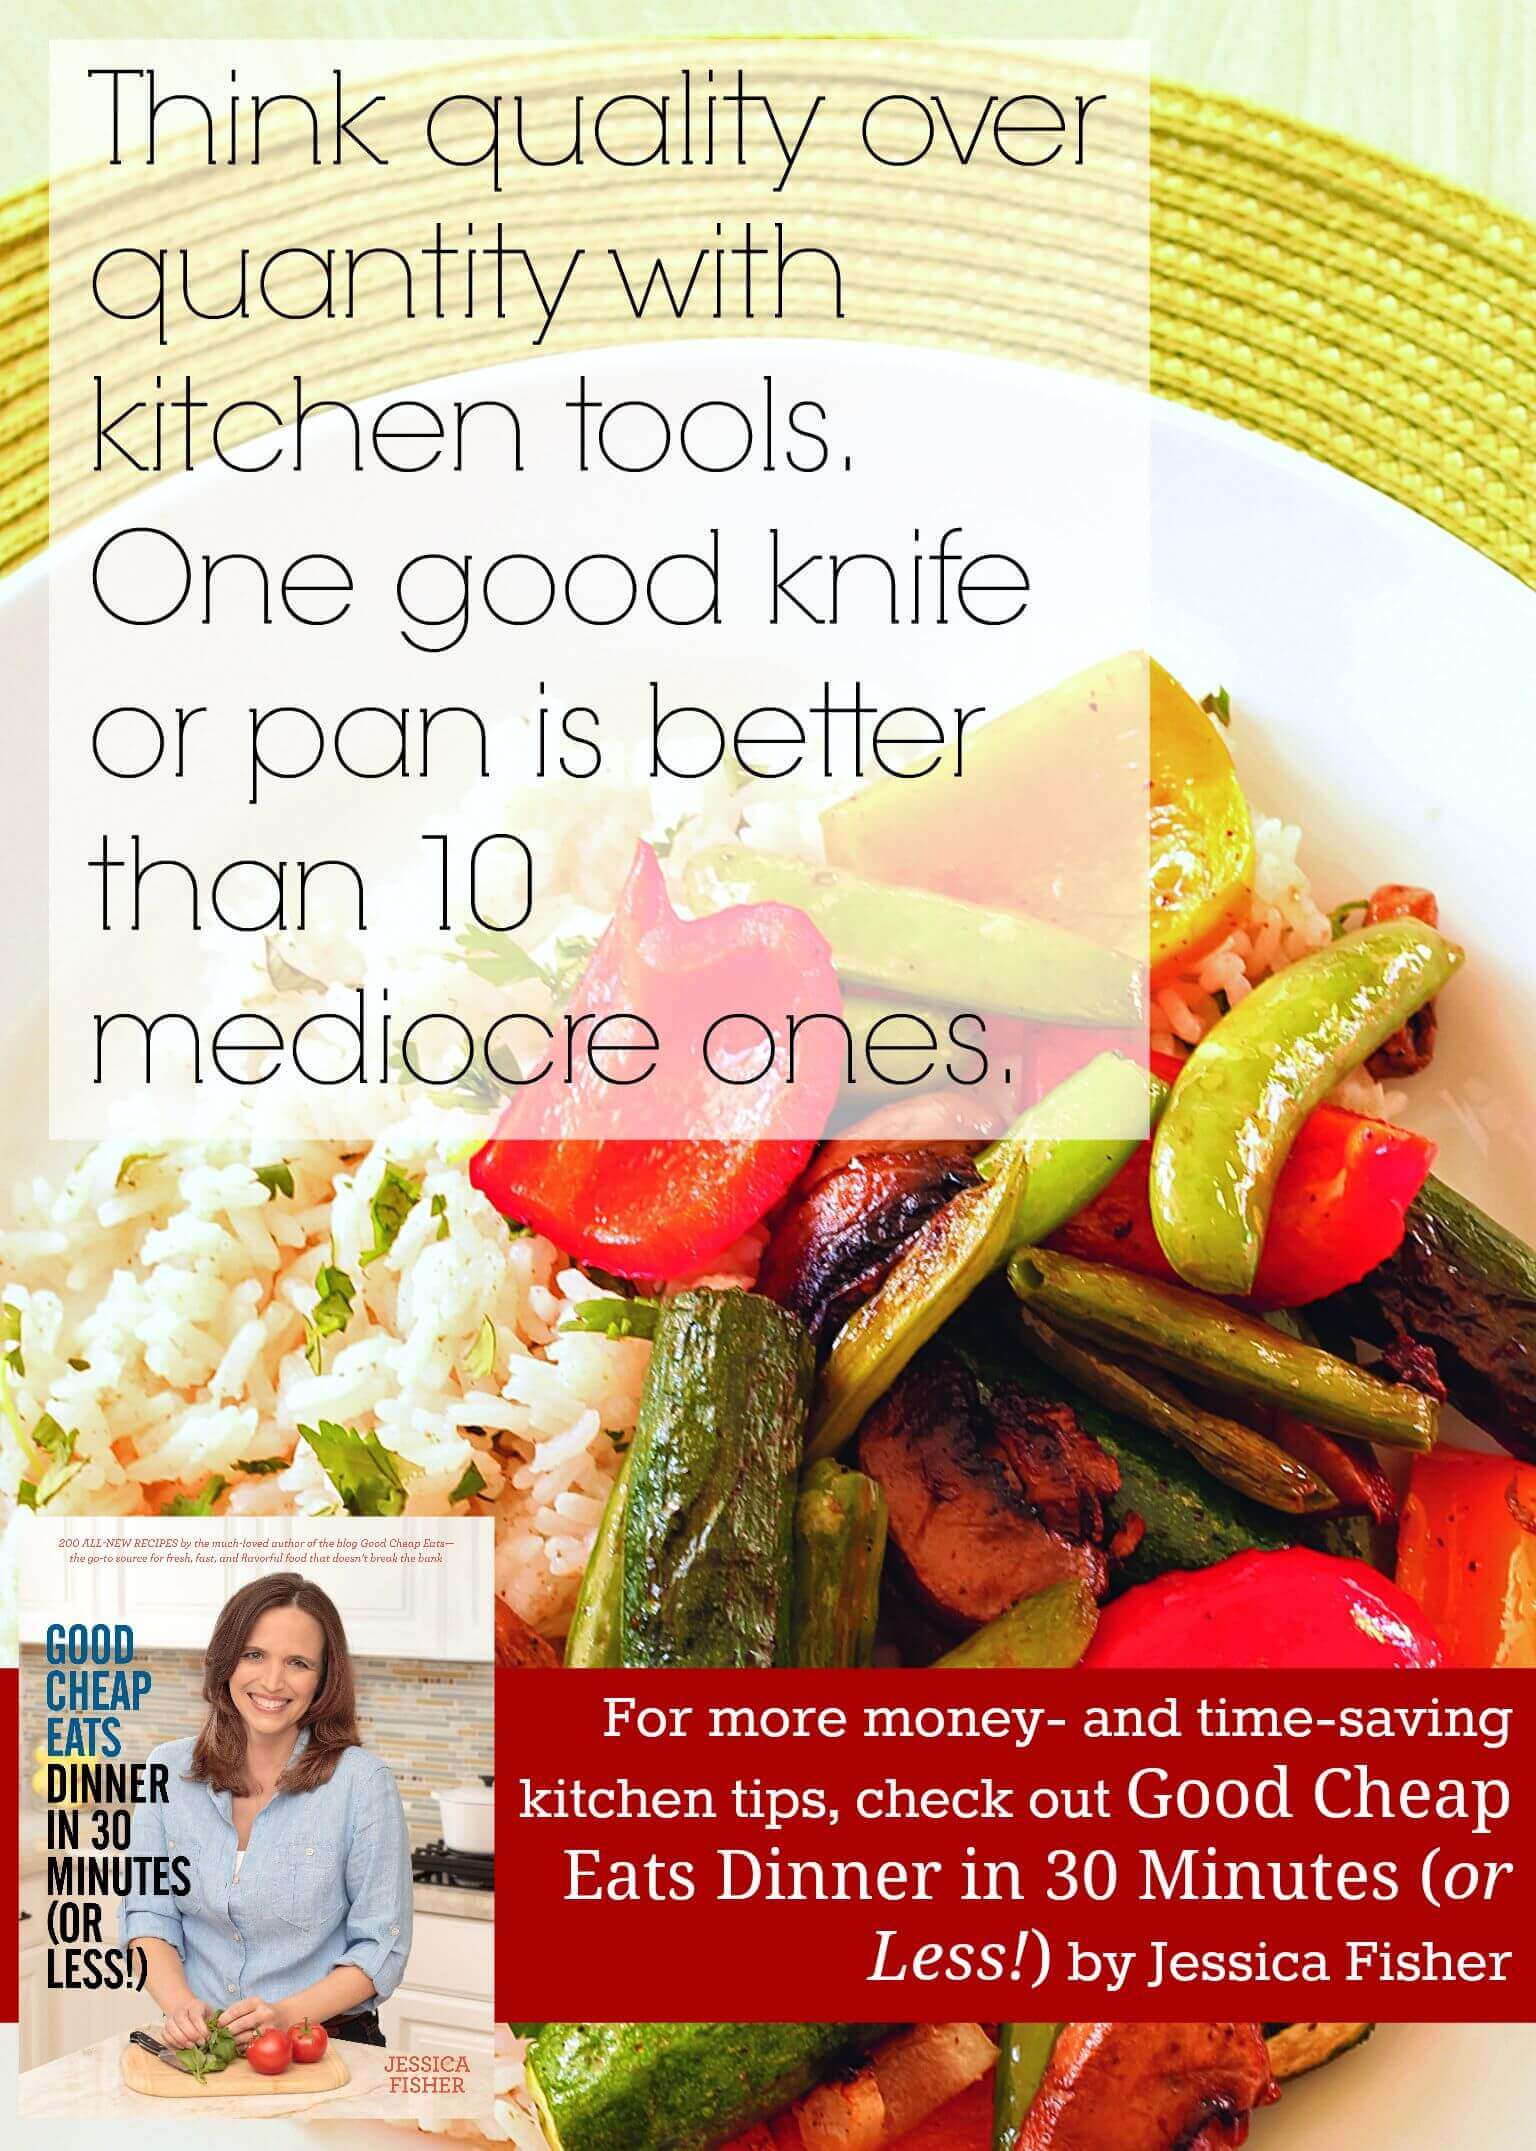 Do you love serving up homemade food to your family but wish it didn't take so much time? Here's some of the top secrets from Jessica from Good Cheap Eats! Have a REAL FOOD dinner on the table in 30 minutes or less with these secrets!